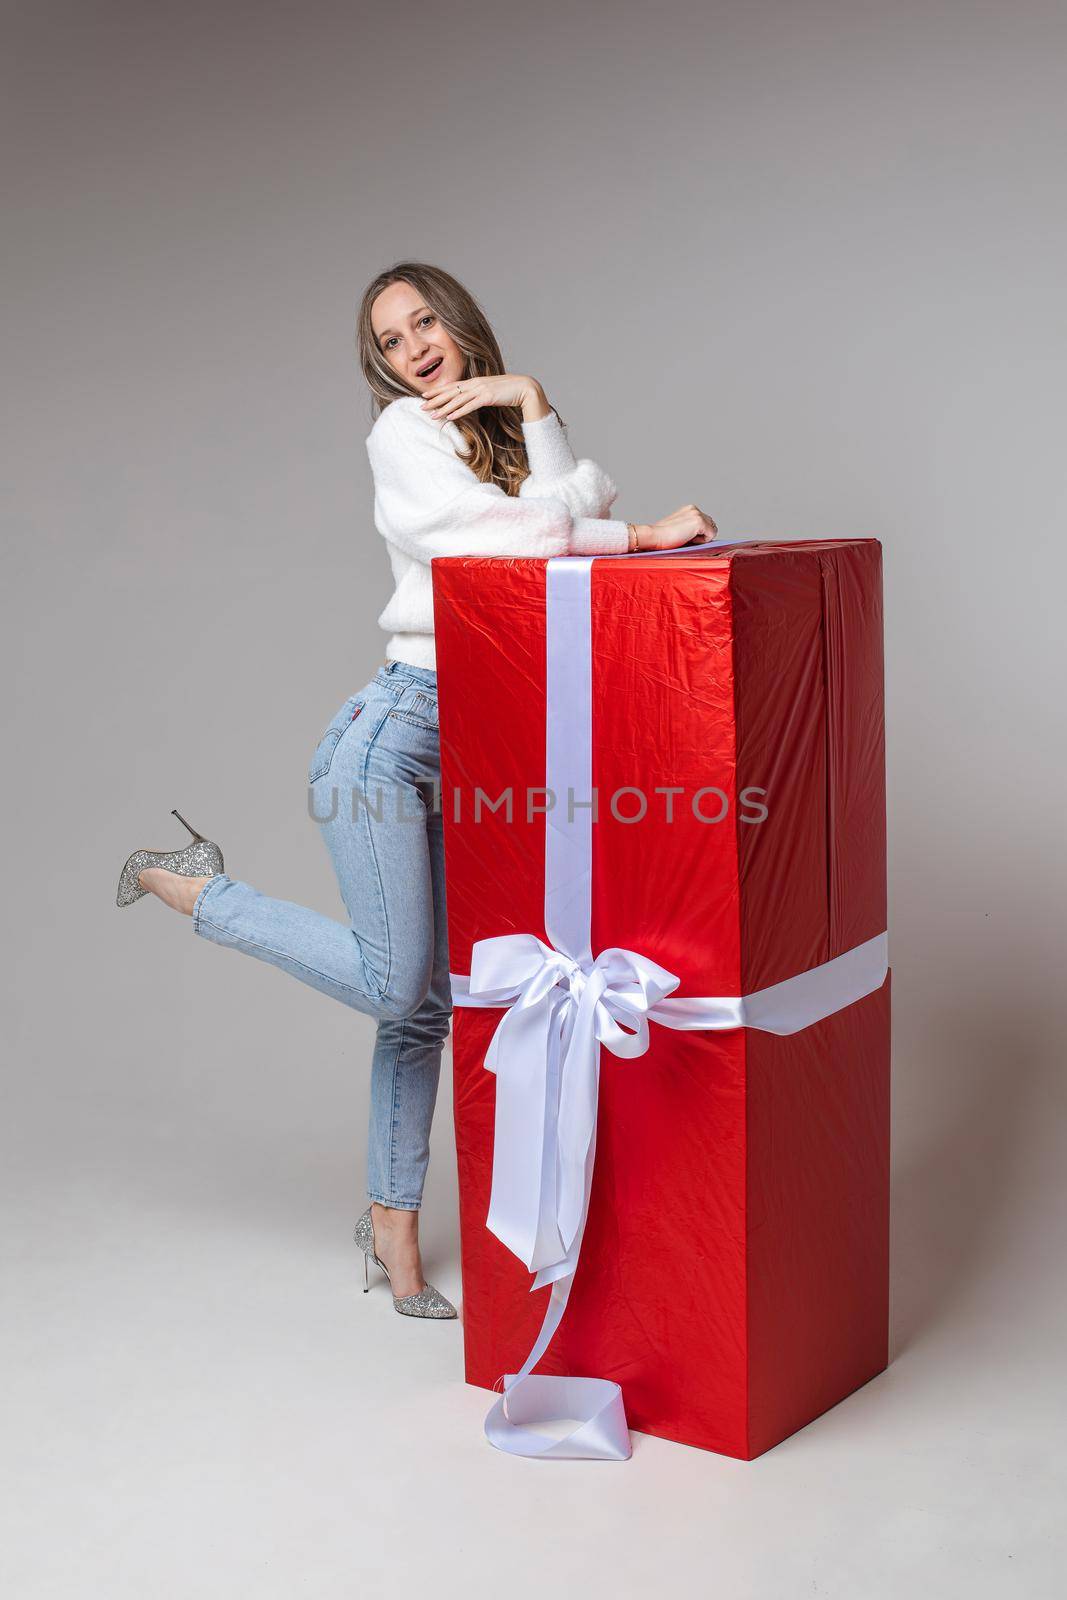 Smiling young woman standing near big red gift box, isolated on grey background. Saint Valentine Day concept